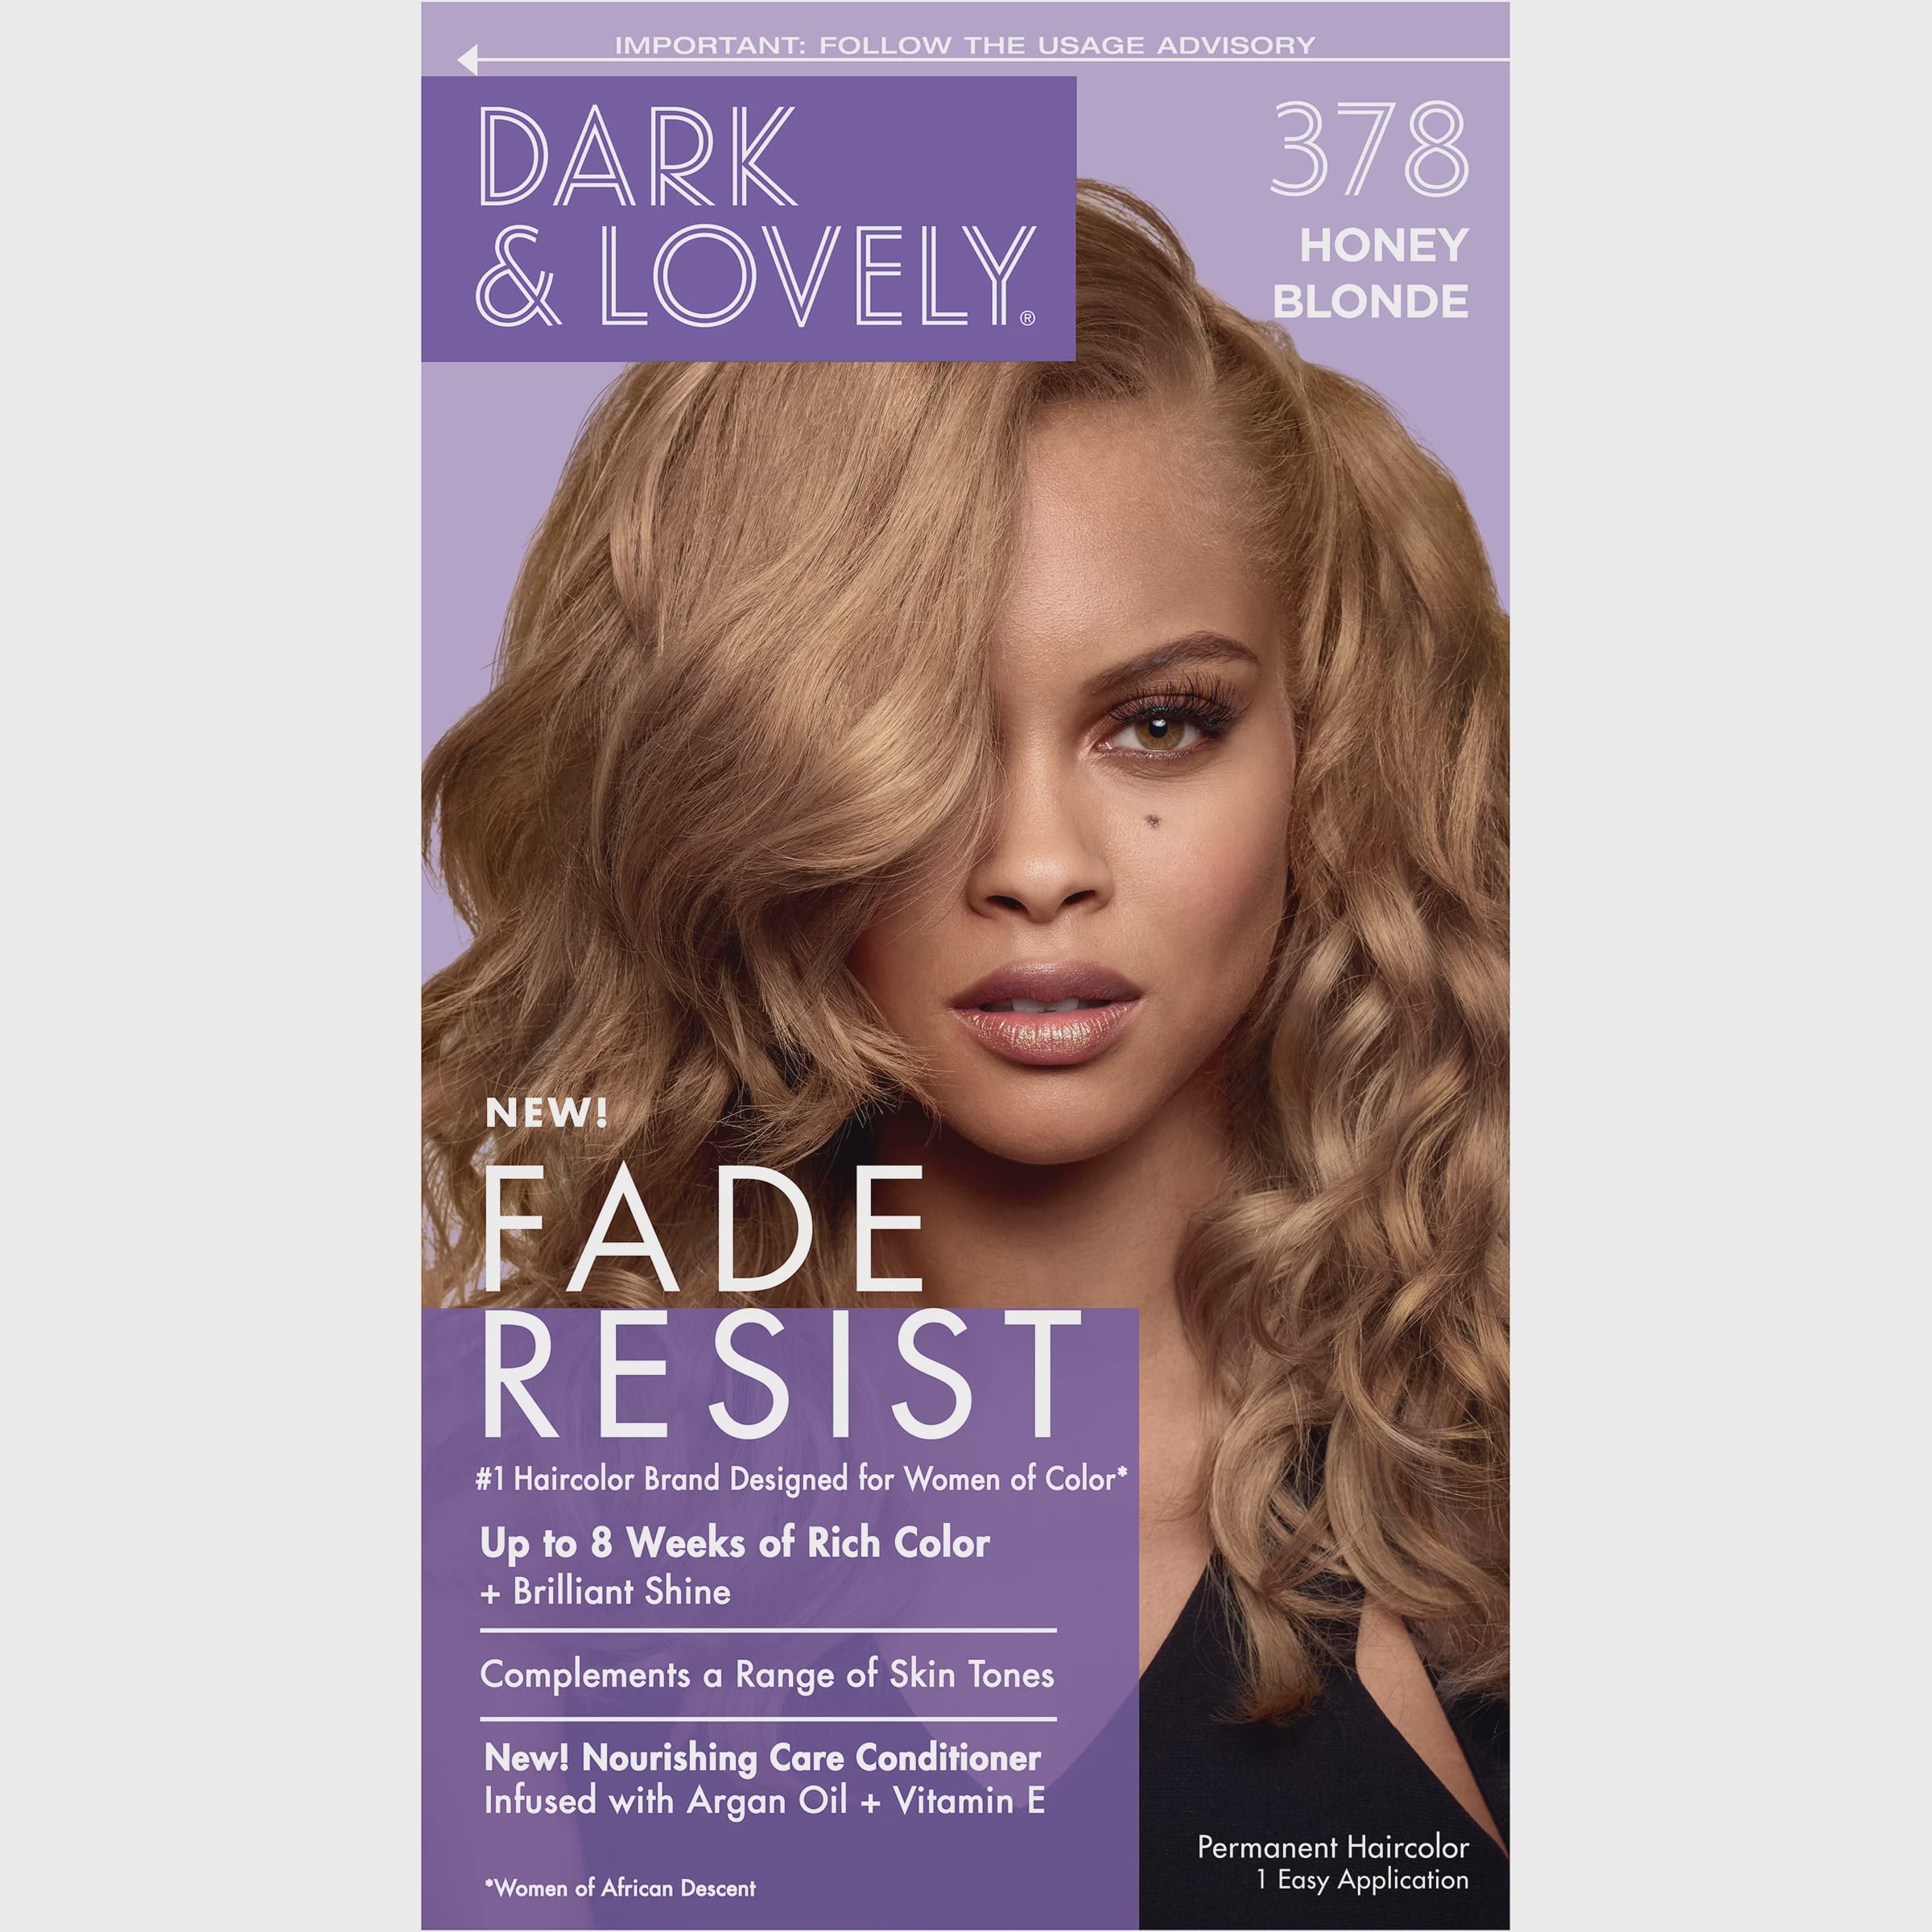 SoftSheen-Carson Dark and Lovely Fade Resist Hair Color, 378 Honey Blonde